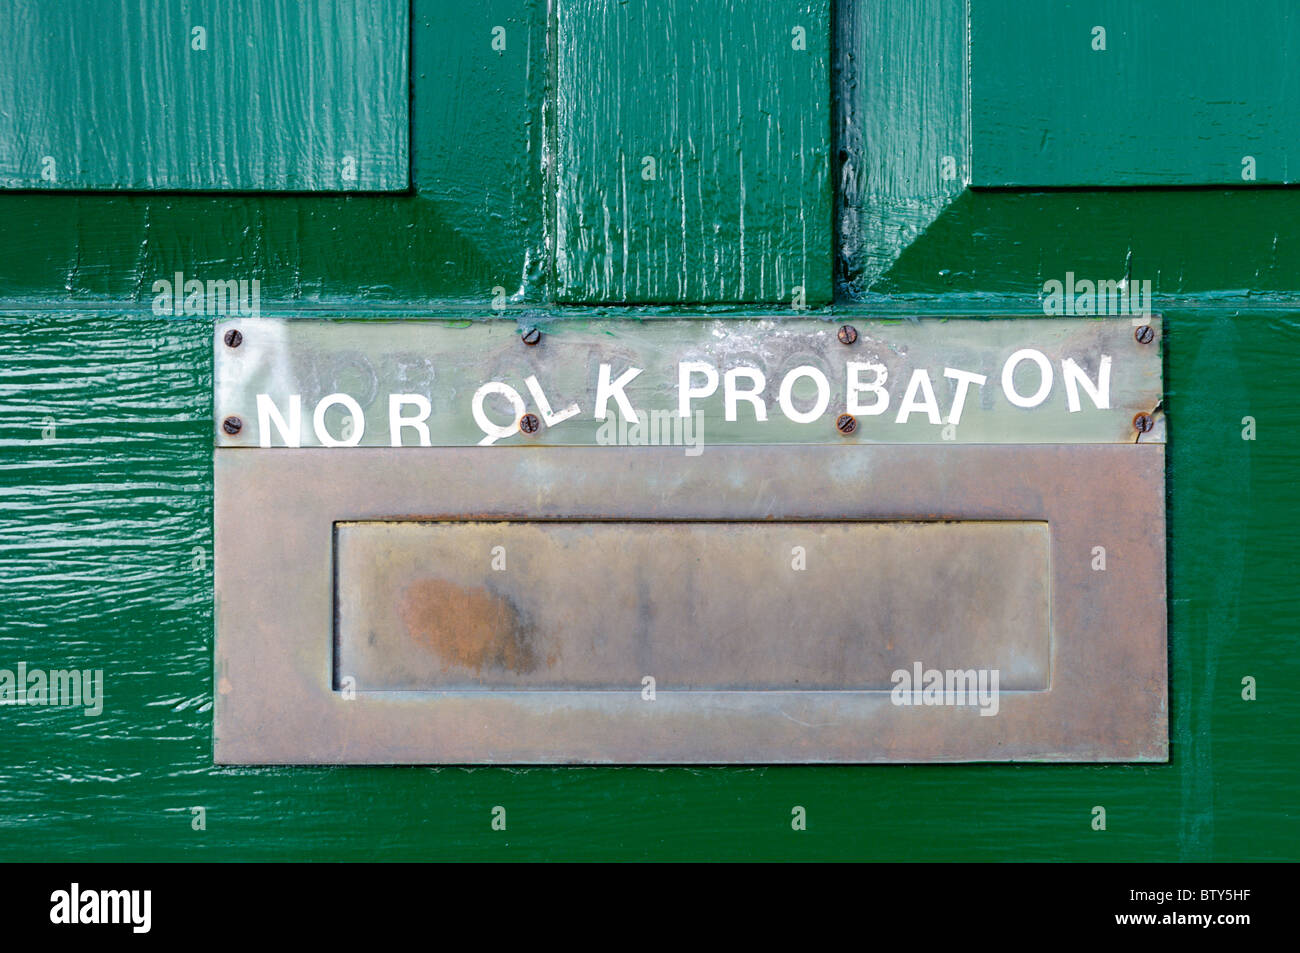 Uneven and missing lettering on a sign for the Norfolk Probation Service letterbox Stock Photo